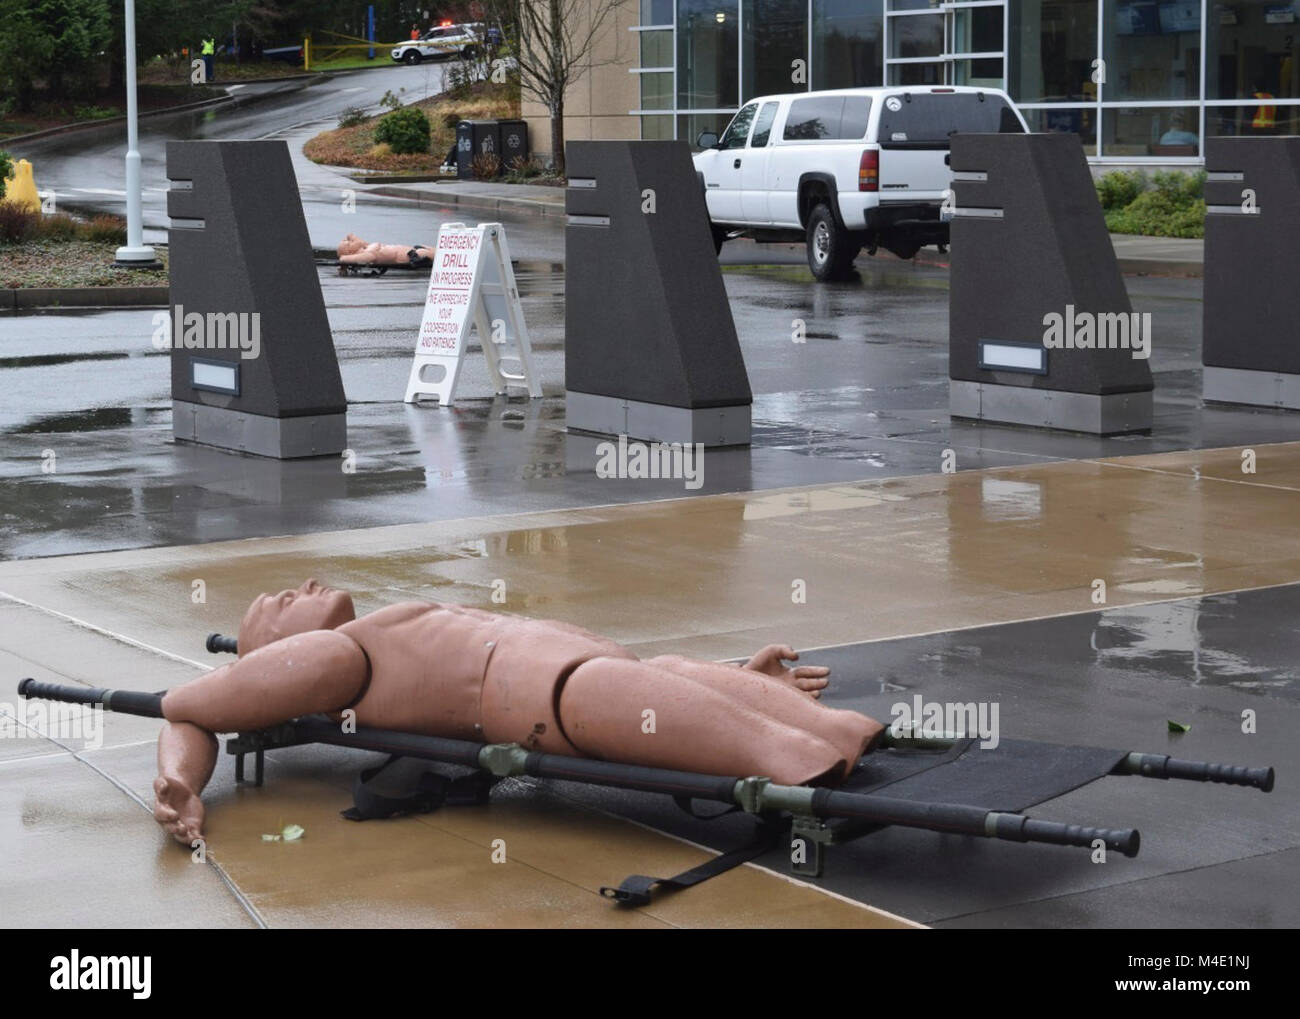 The fallen await... during the annual security exercise Operation Solid   Curtain/Citadel Shield held at Naval Hospital Bremerton, mannequin were used   for trauma simulation props to allowing staff to hone response skills needed   to handle multiple casualties (Official Navy Stock Photo